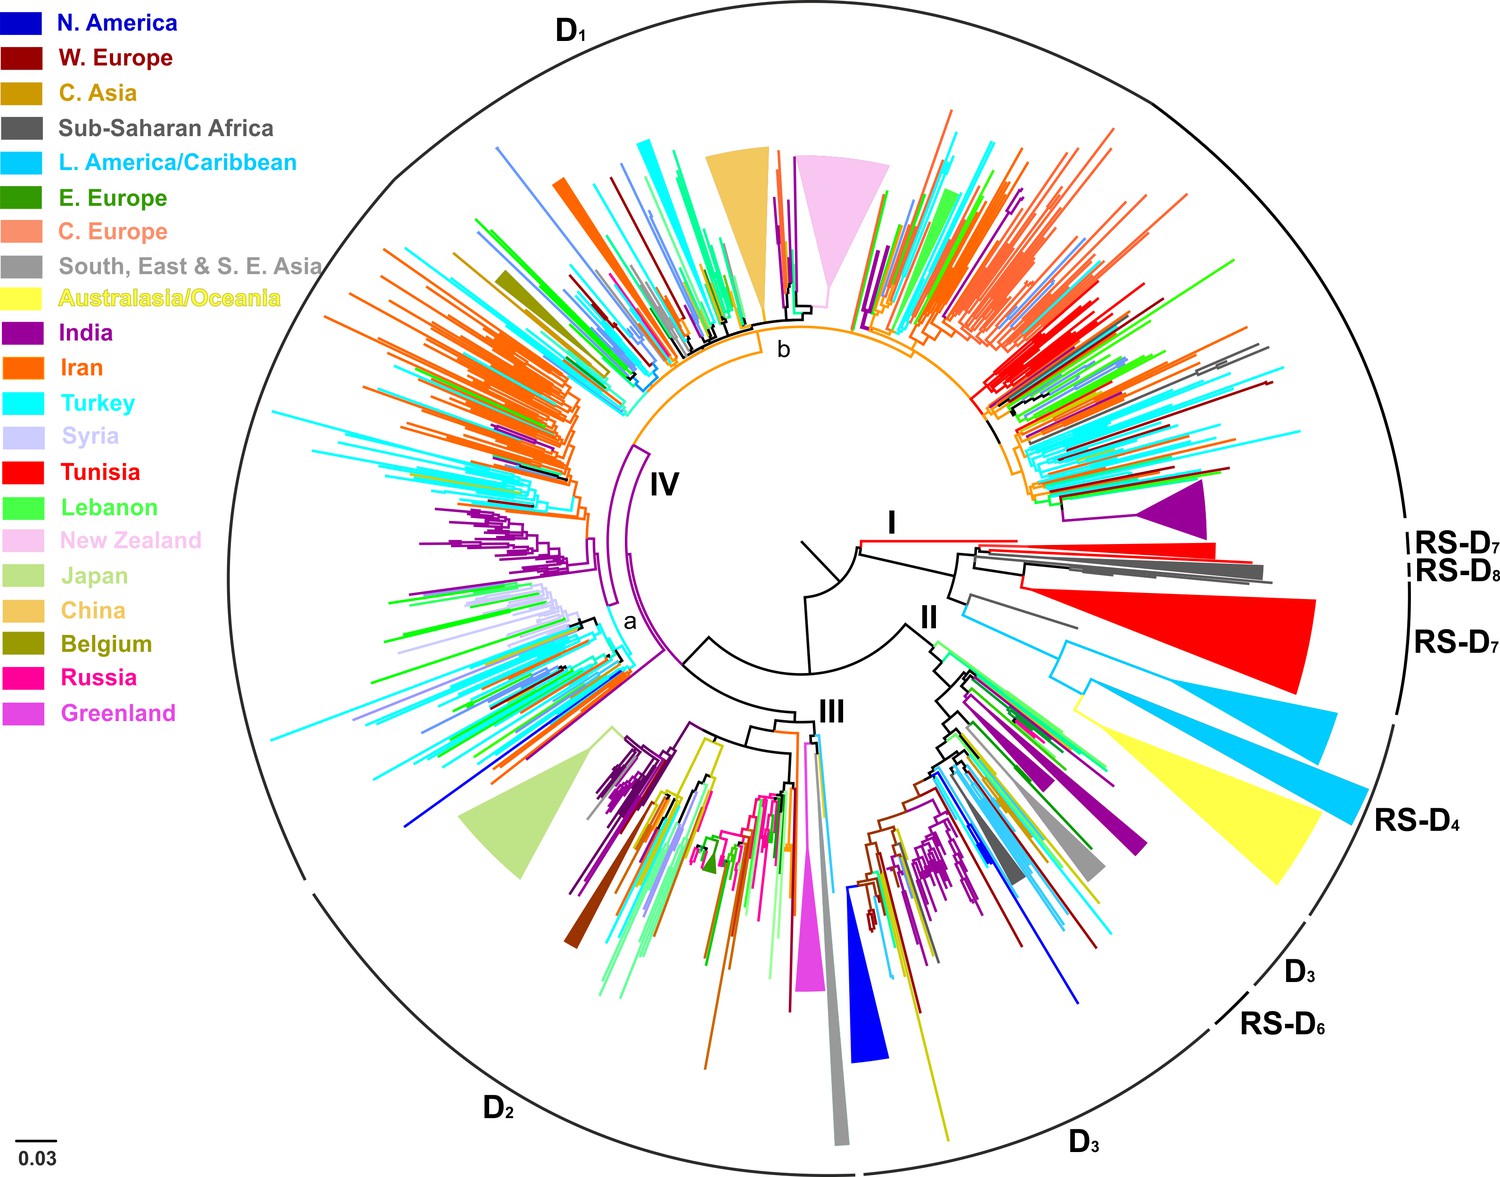 Unravelling The History Of Hepatitis B Virus Genotypes A And D Infection Using A Full Genome Phylogenetic And Phylogeographic Approach Elife